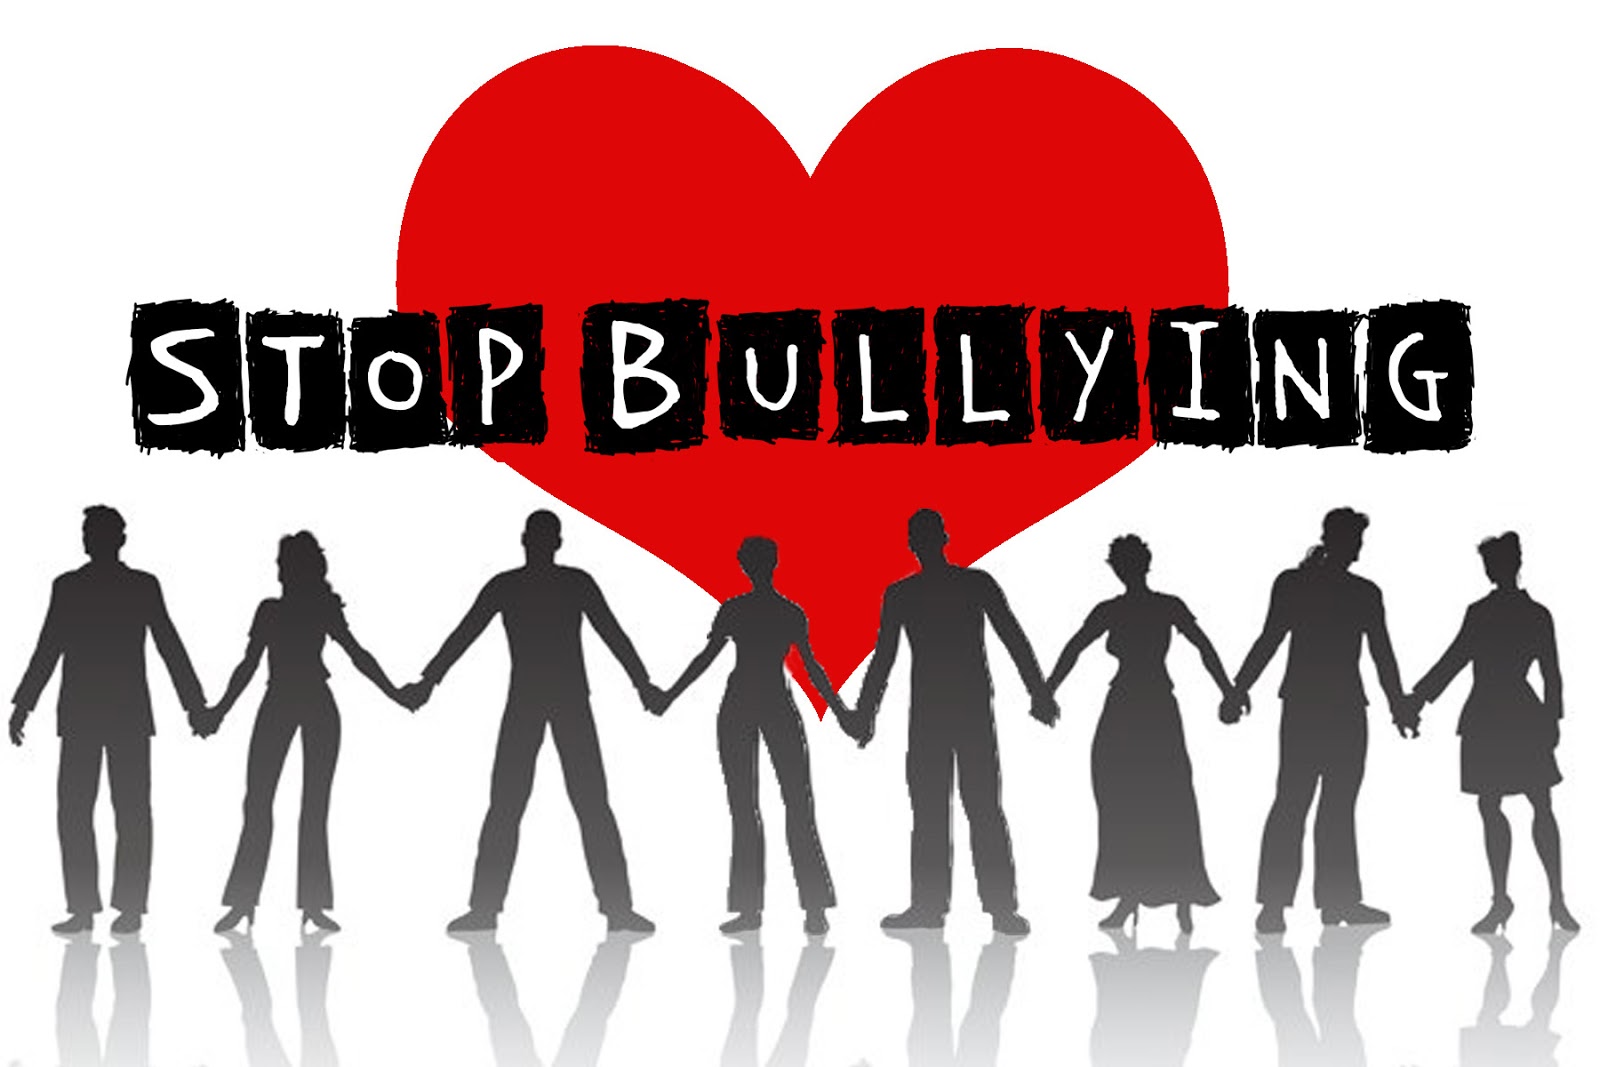 My world Stop Bullying Now!!